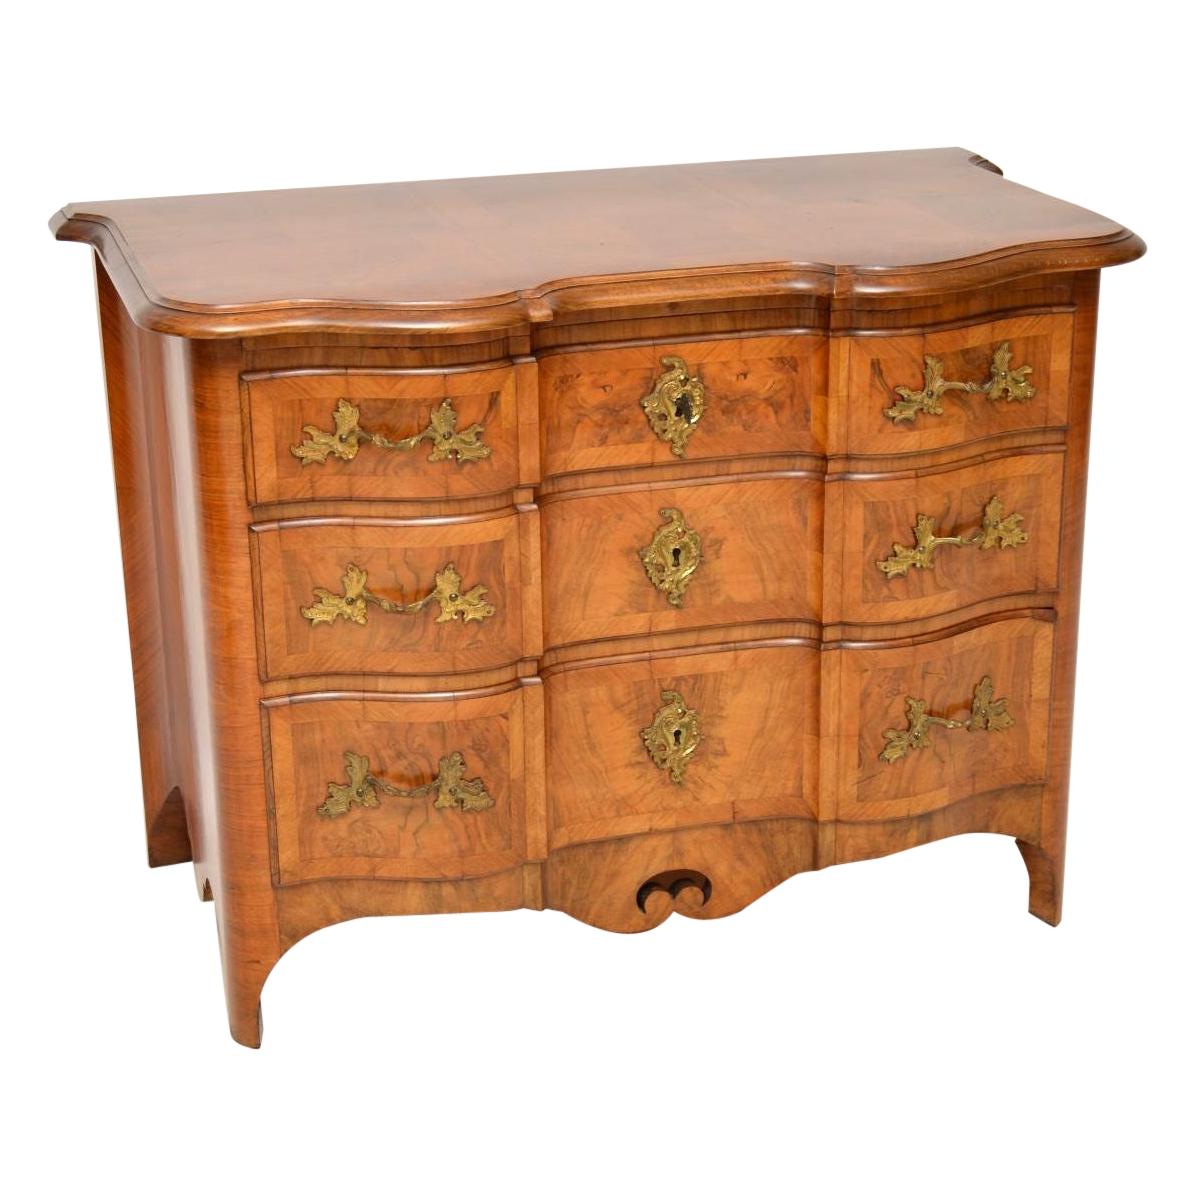 Antique Swedish Walnut Commode or Chest of Drawers